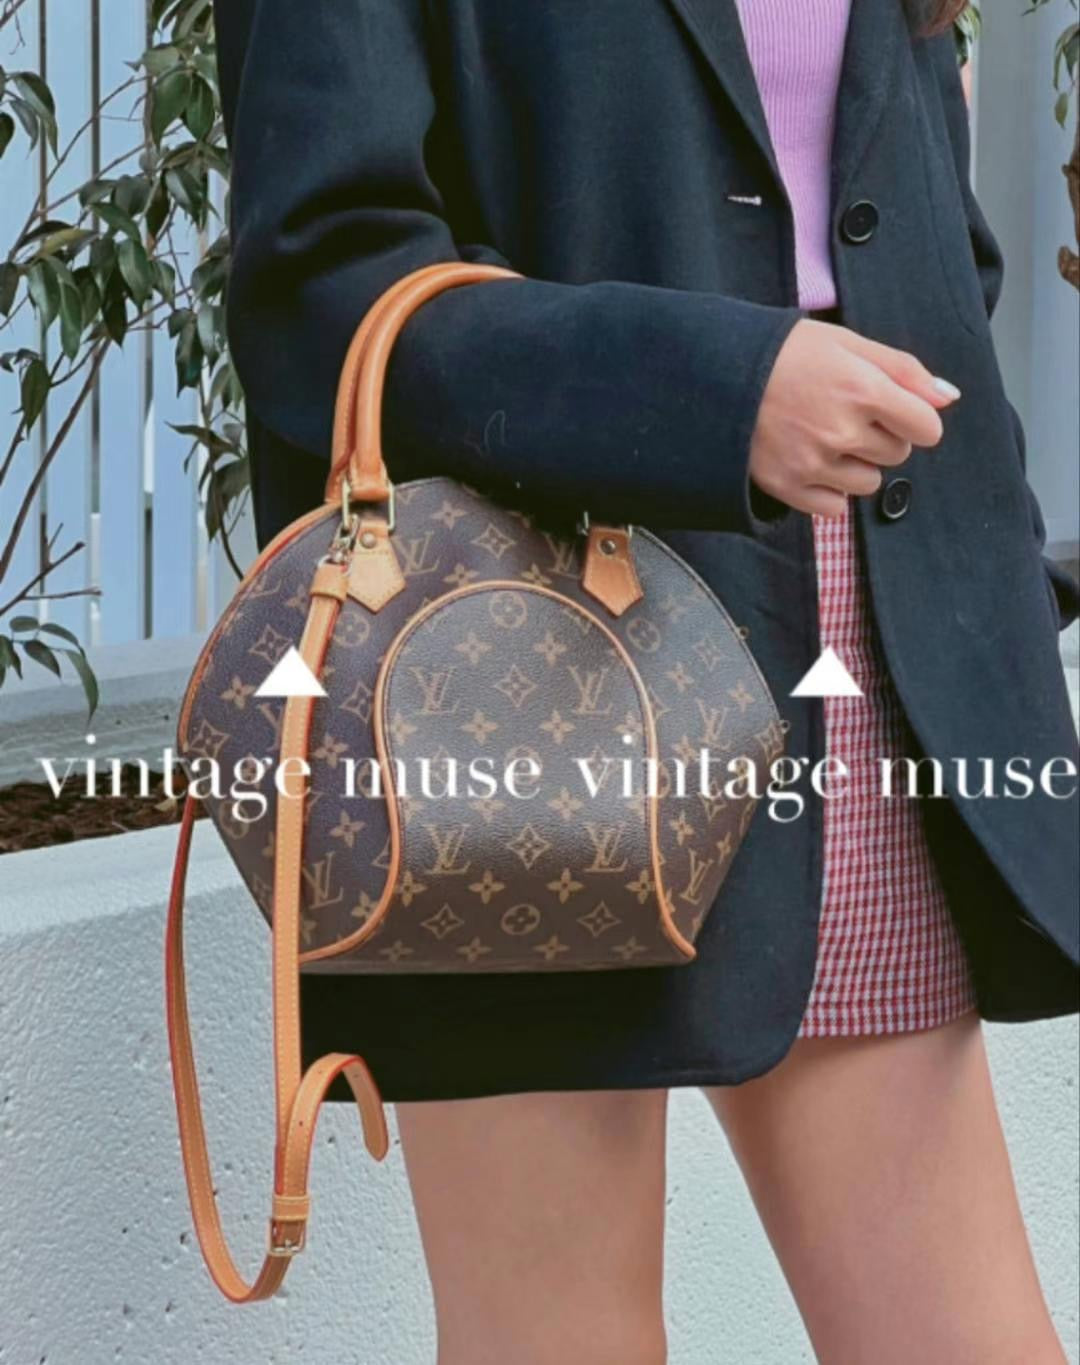 Louis Vuitton 1997 pre-owned Ellipse PM tote bag Brown